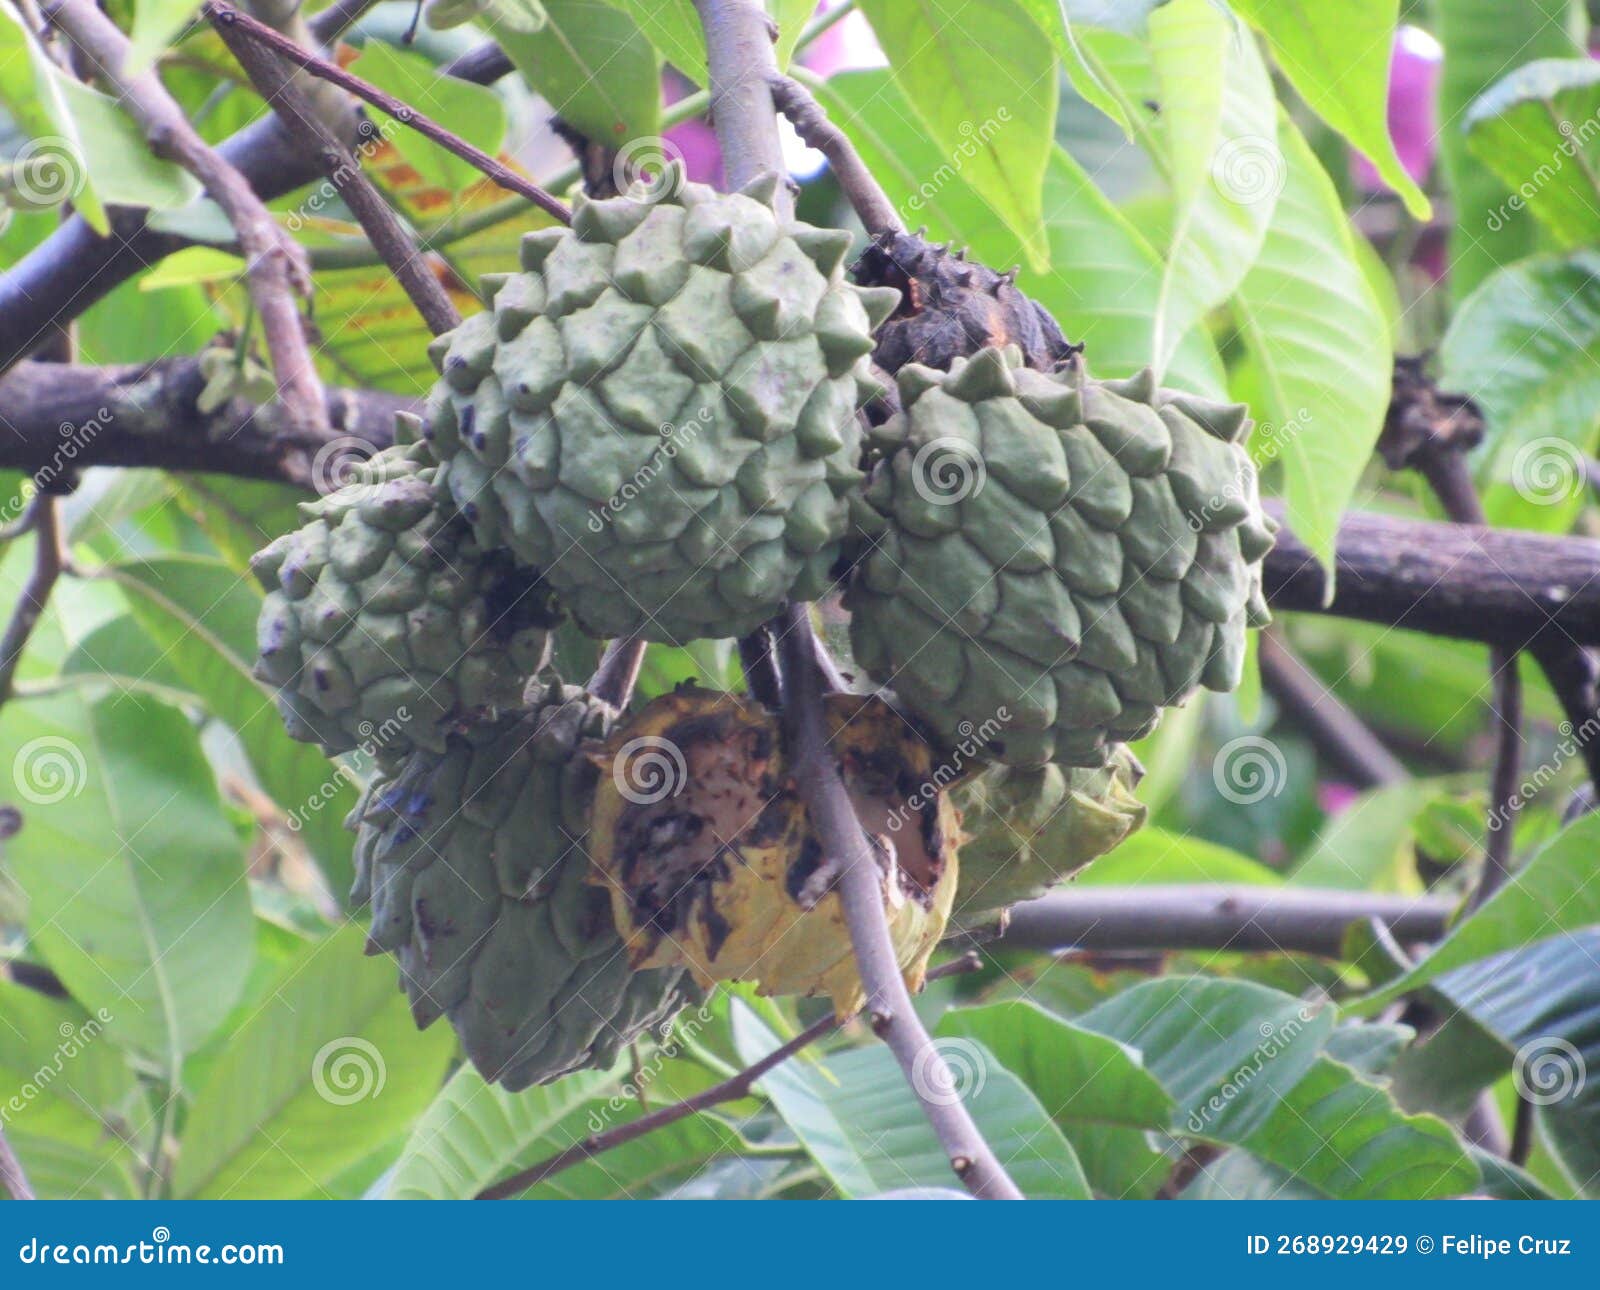 annona squamosa, popularly known as 'fruta-do-conde'. shot in ilhabela, sp, brazil.